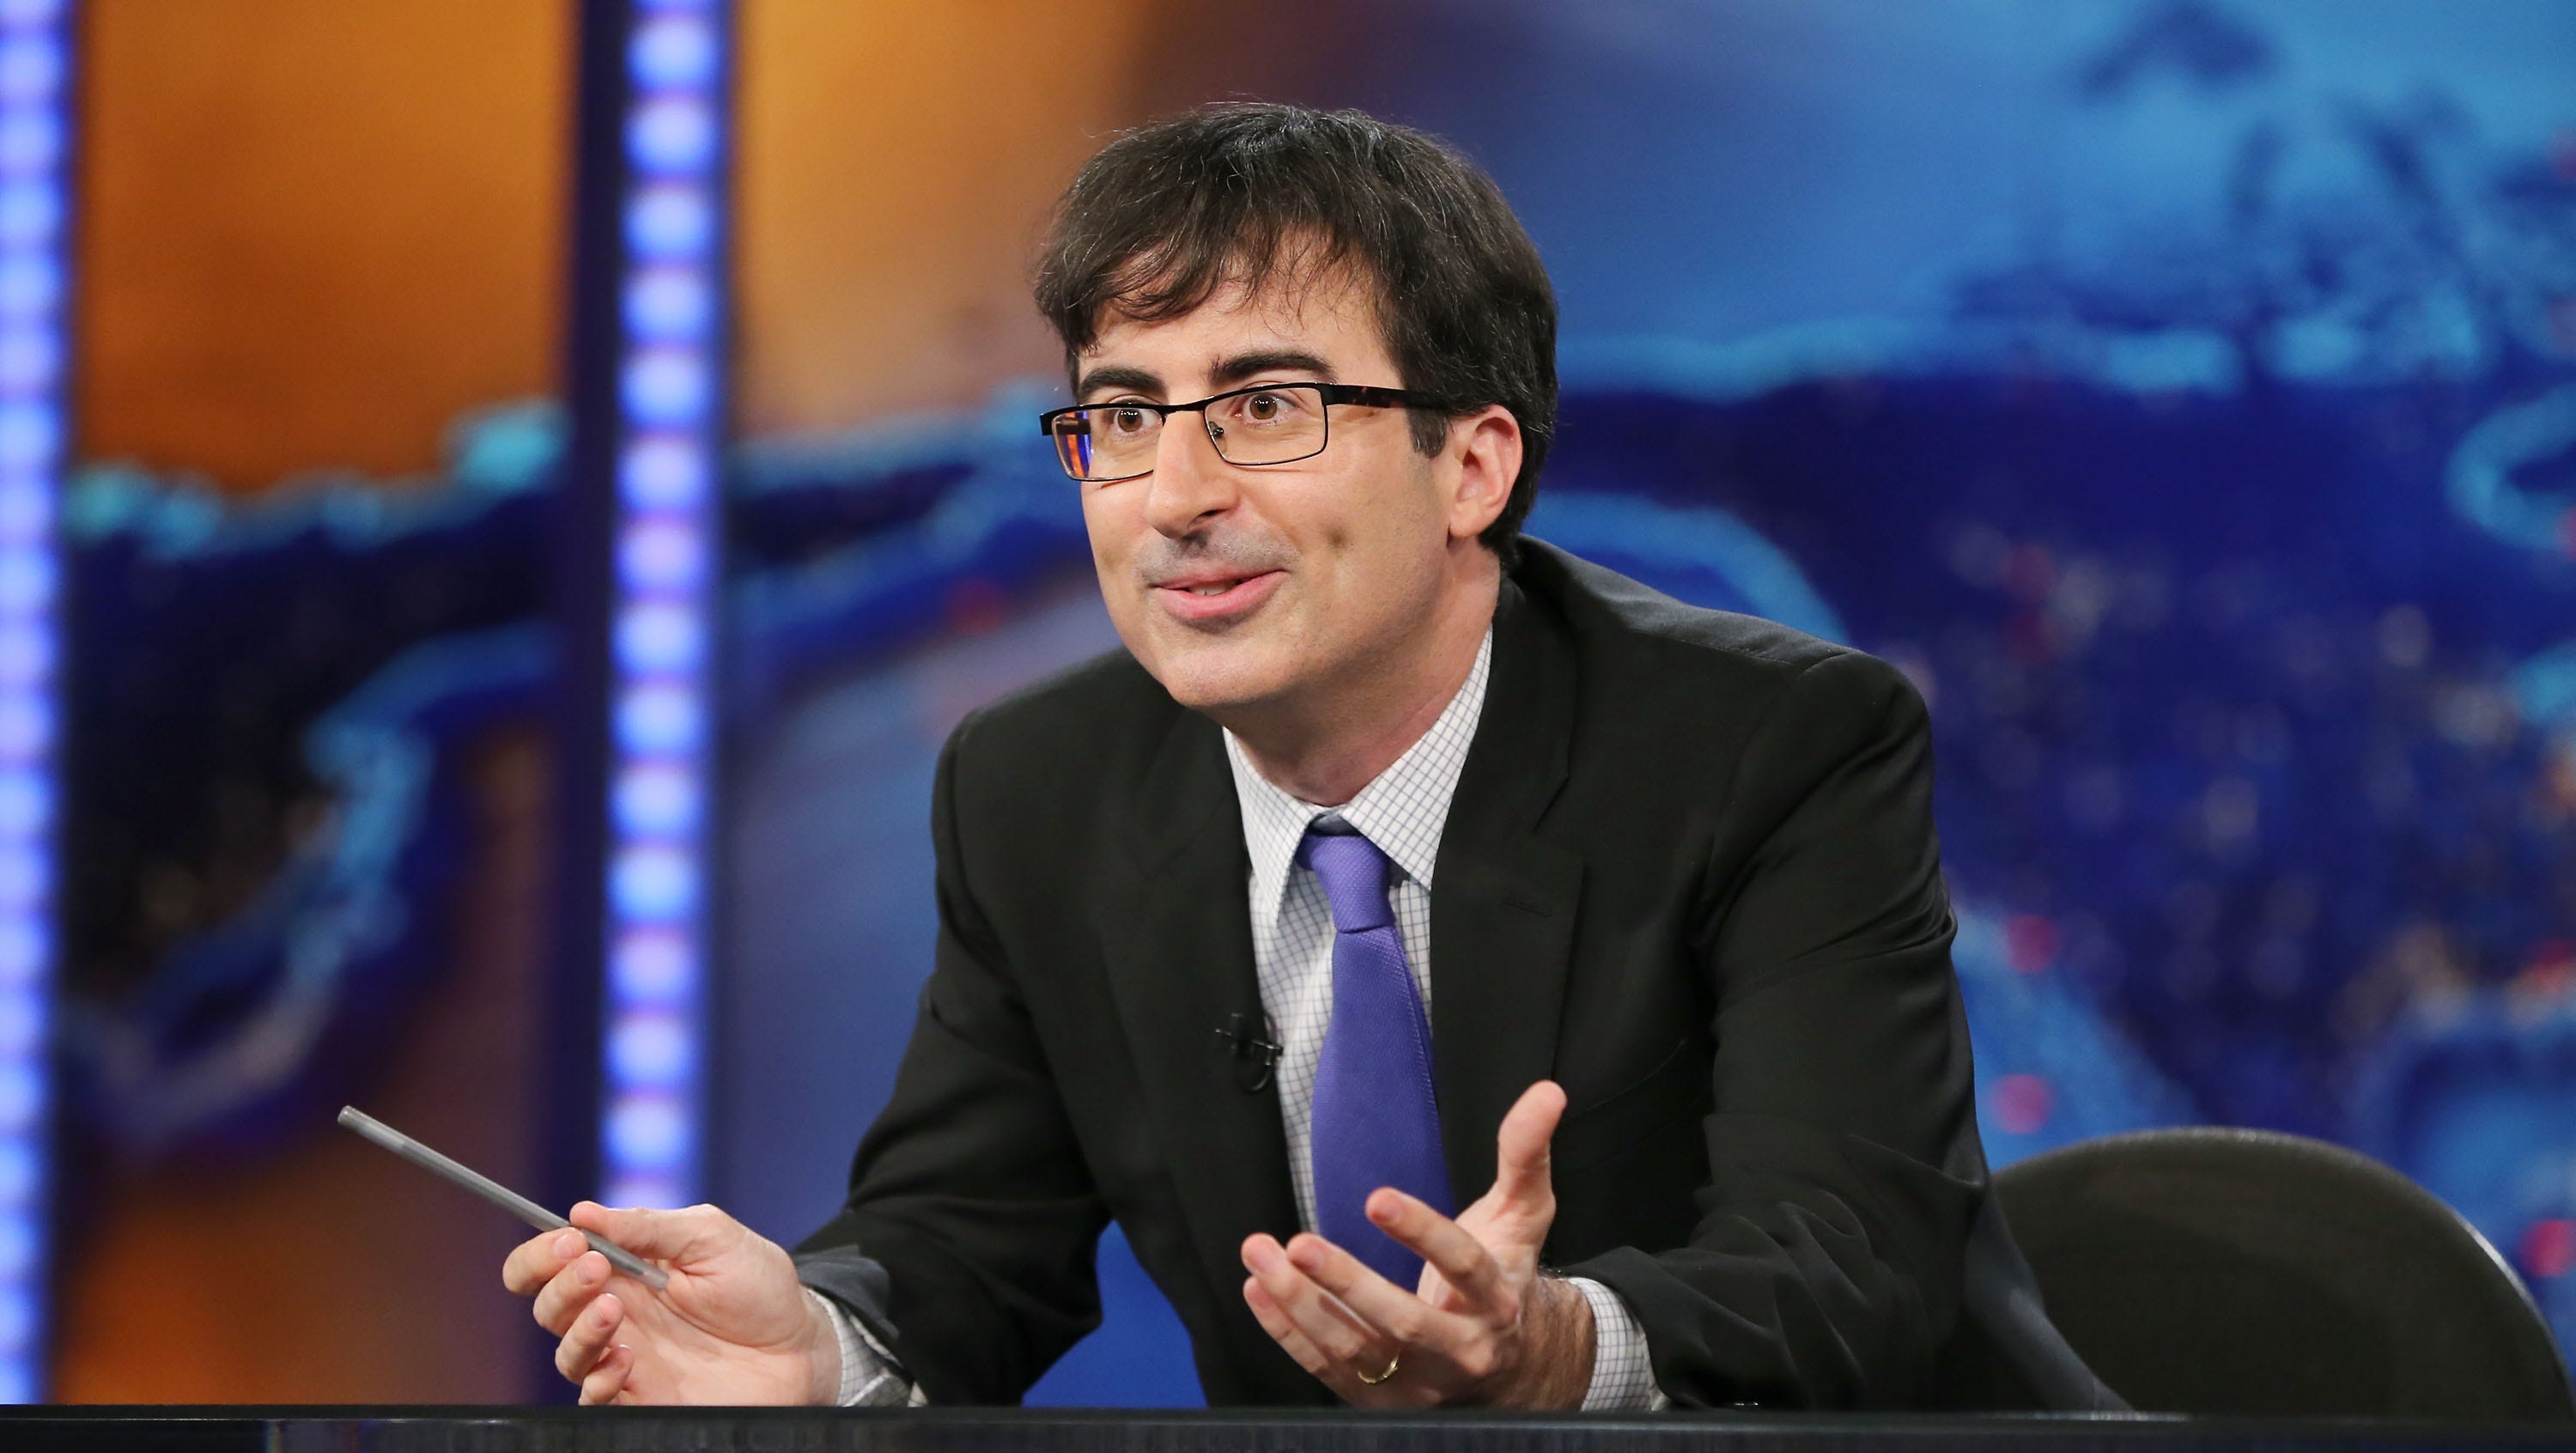 John Oliver Of Daily Show Gets Hbo Comedy Series 